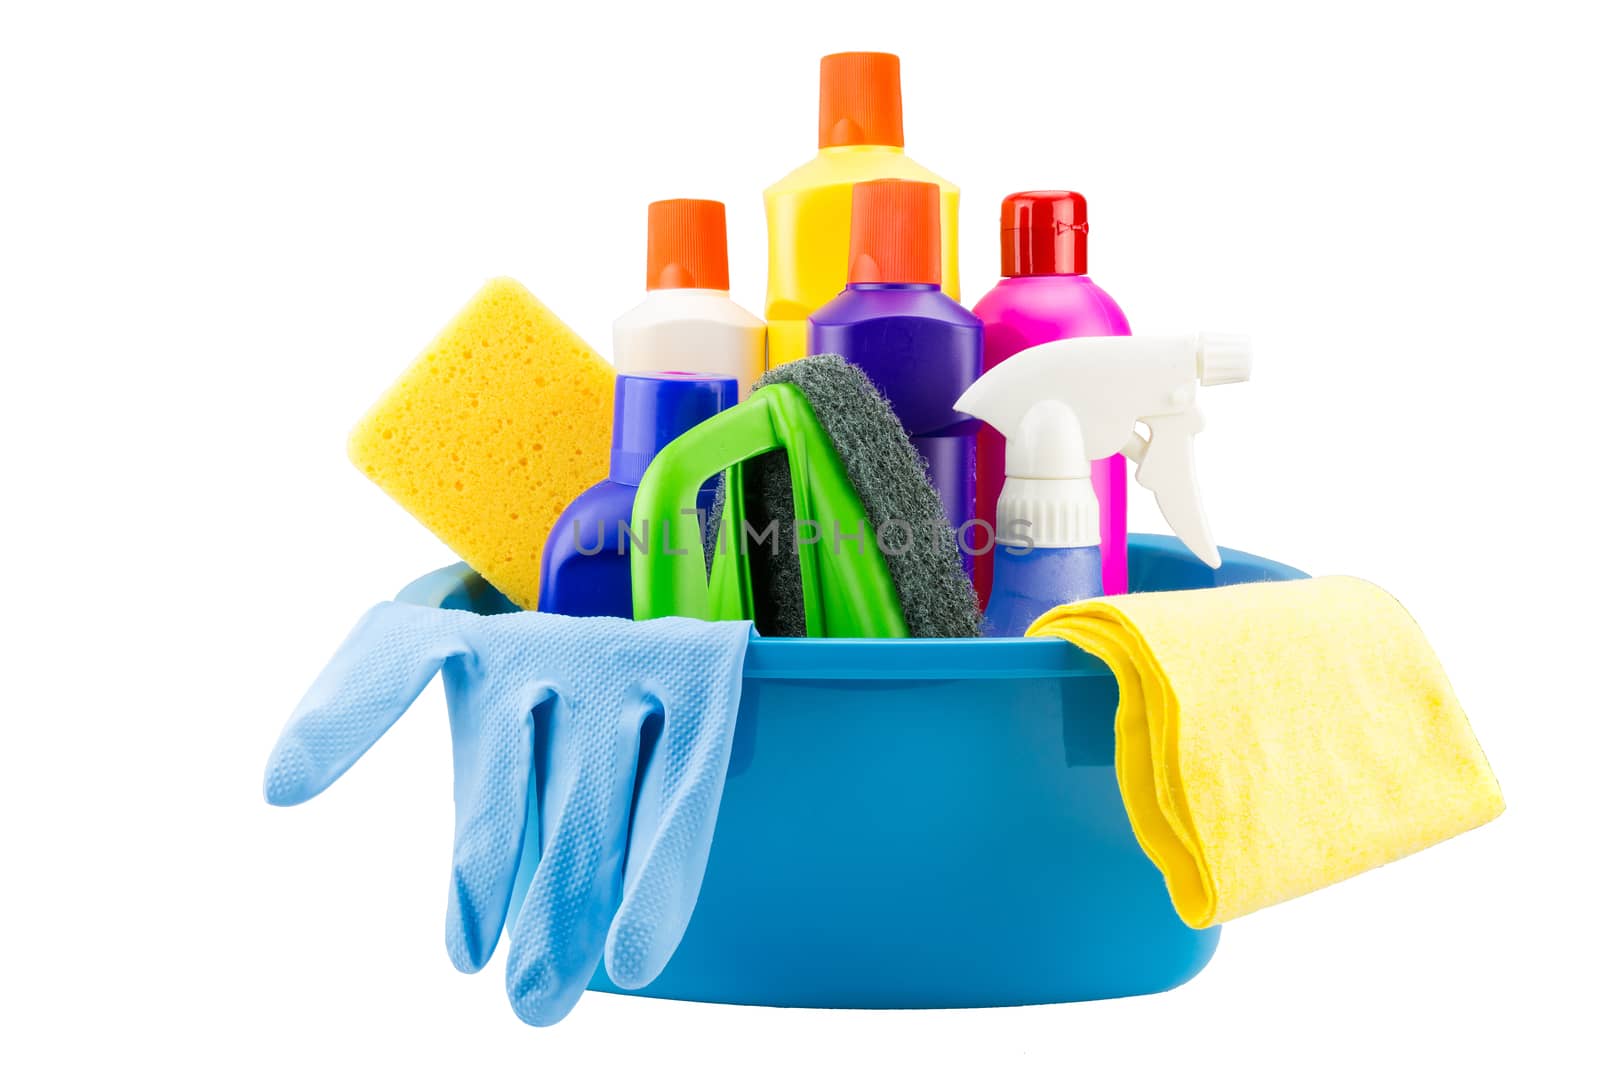 Cleaning tools in blue bucket on white background (Isolated)